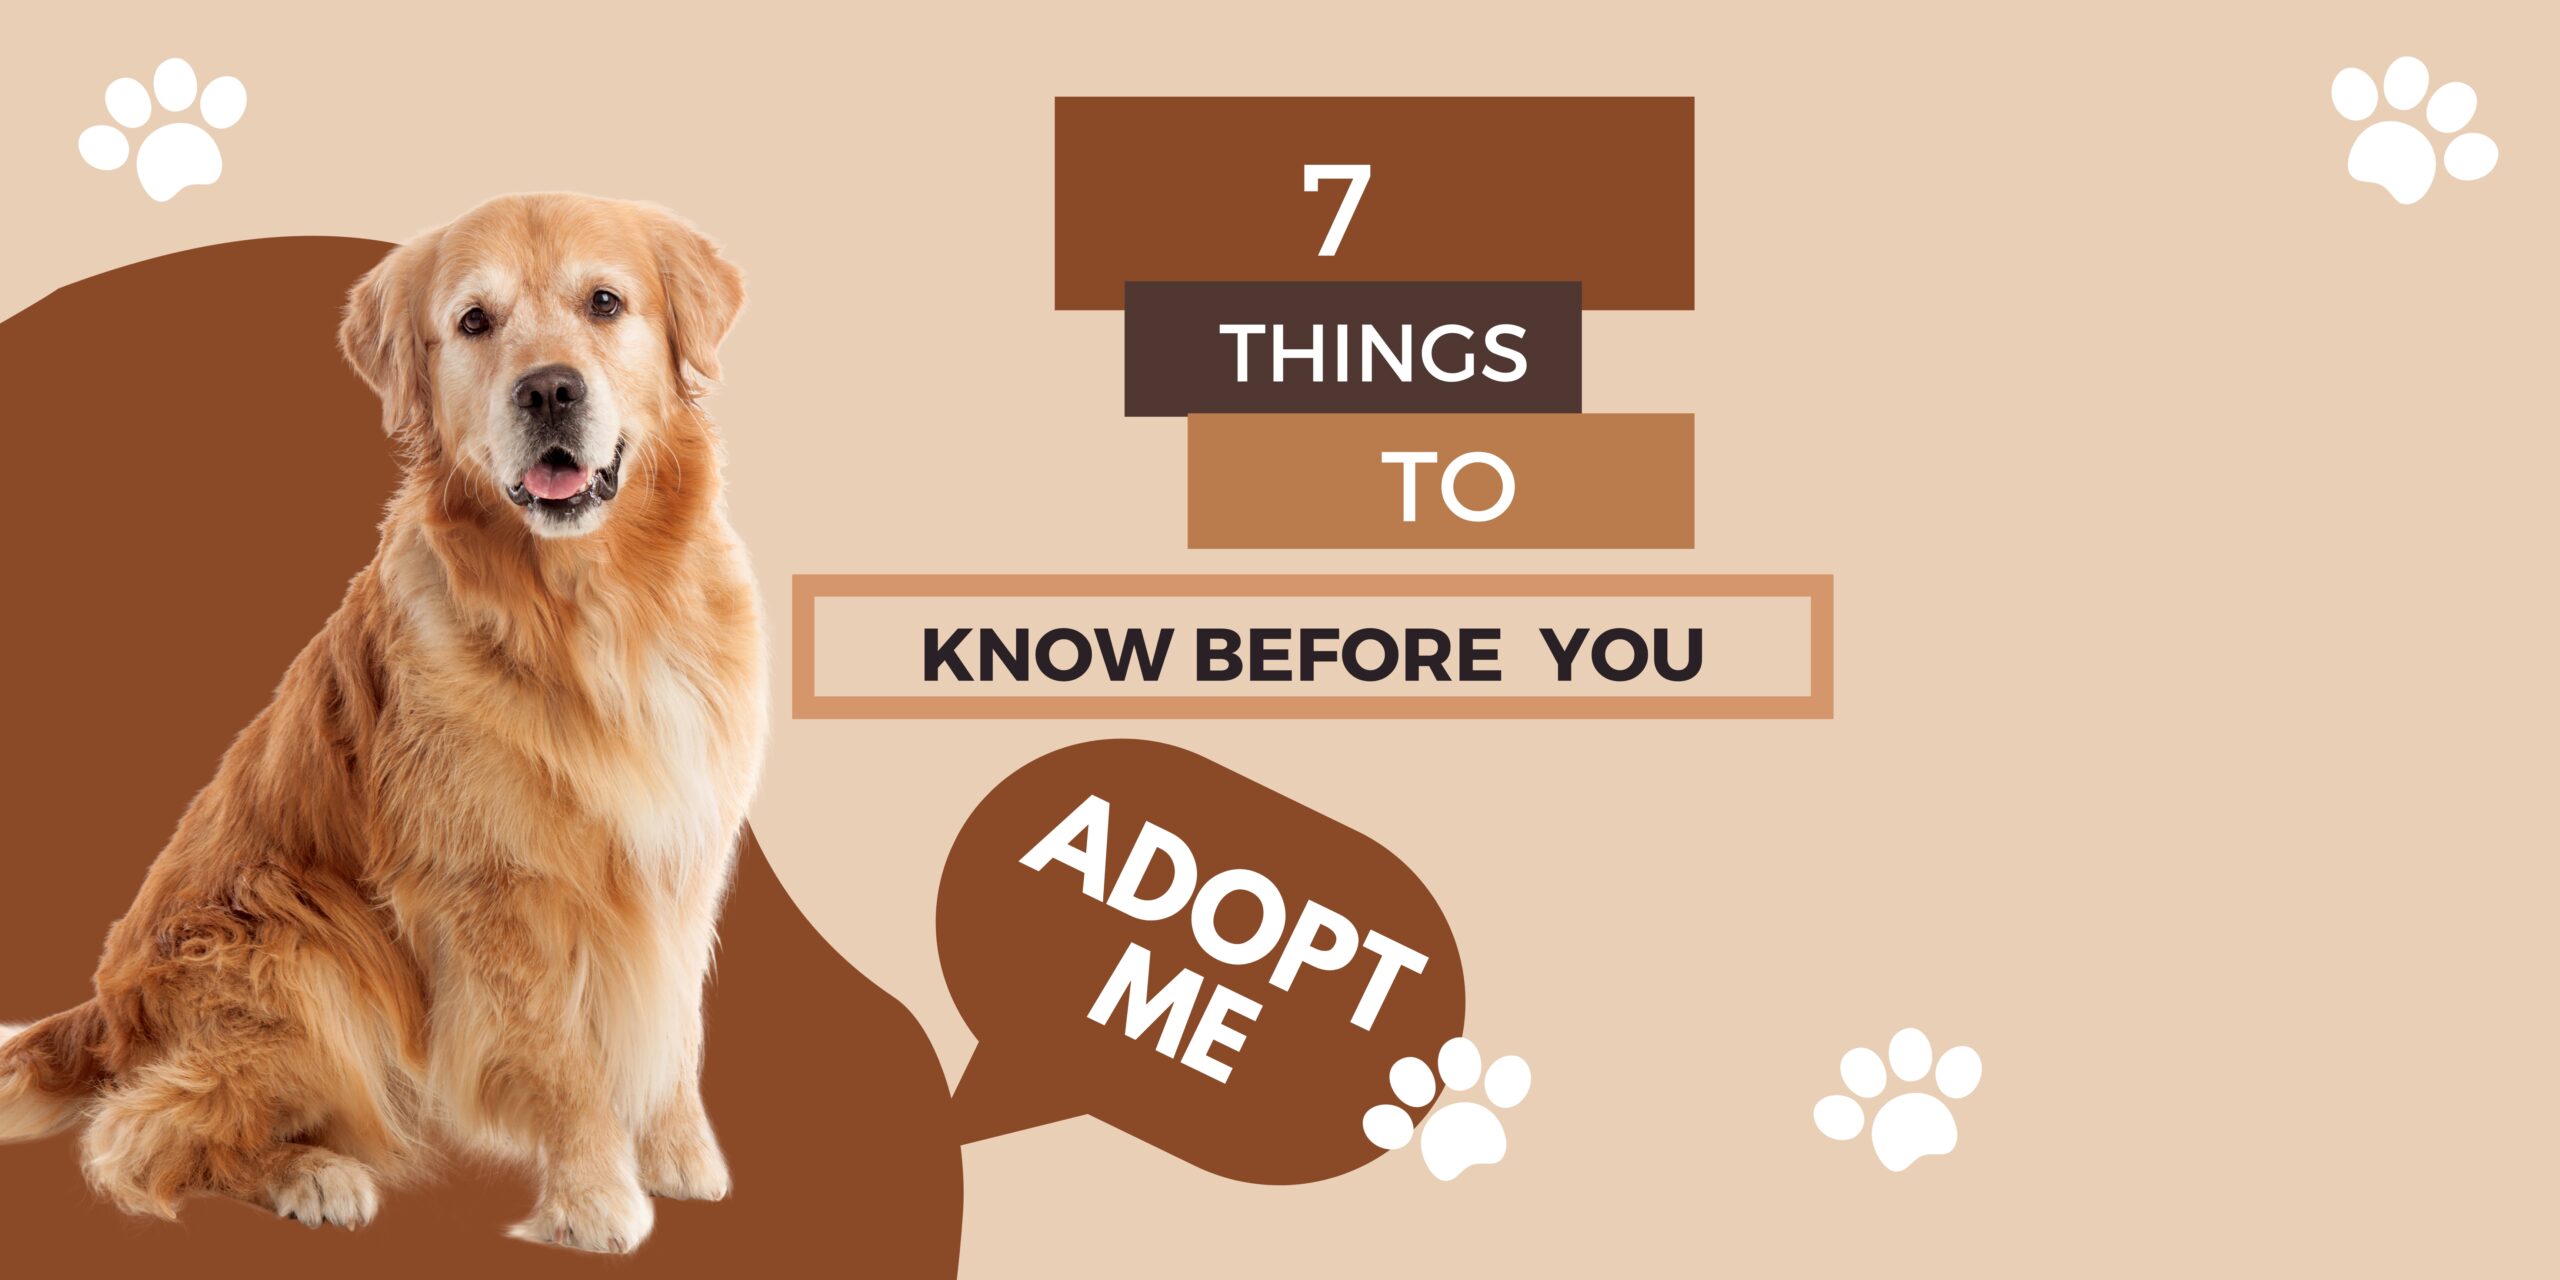 7 things to know about dogs